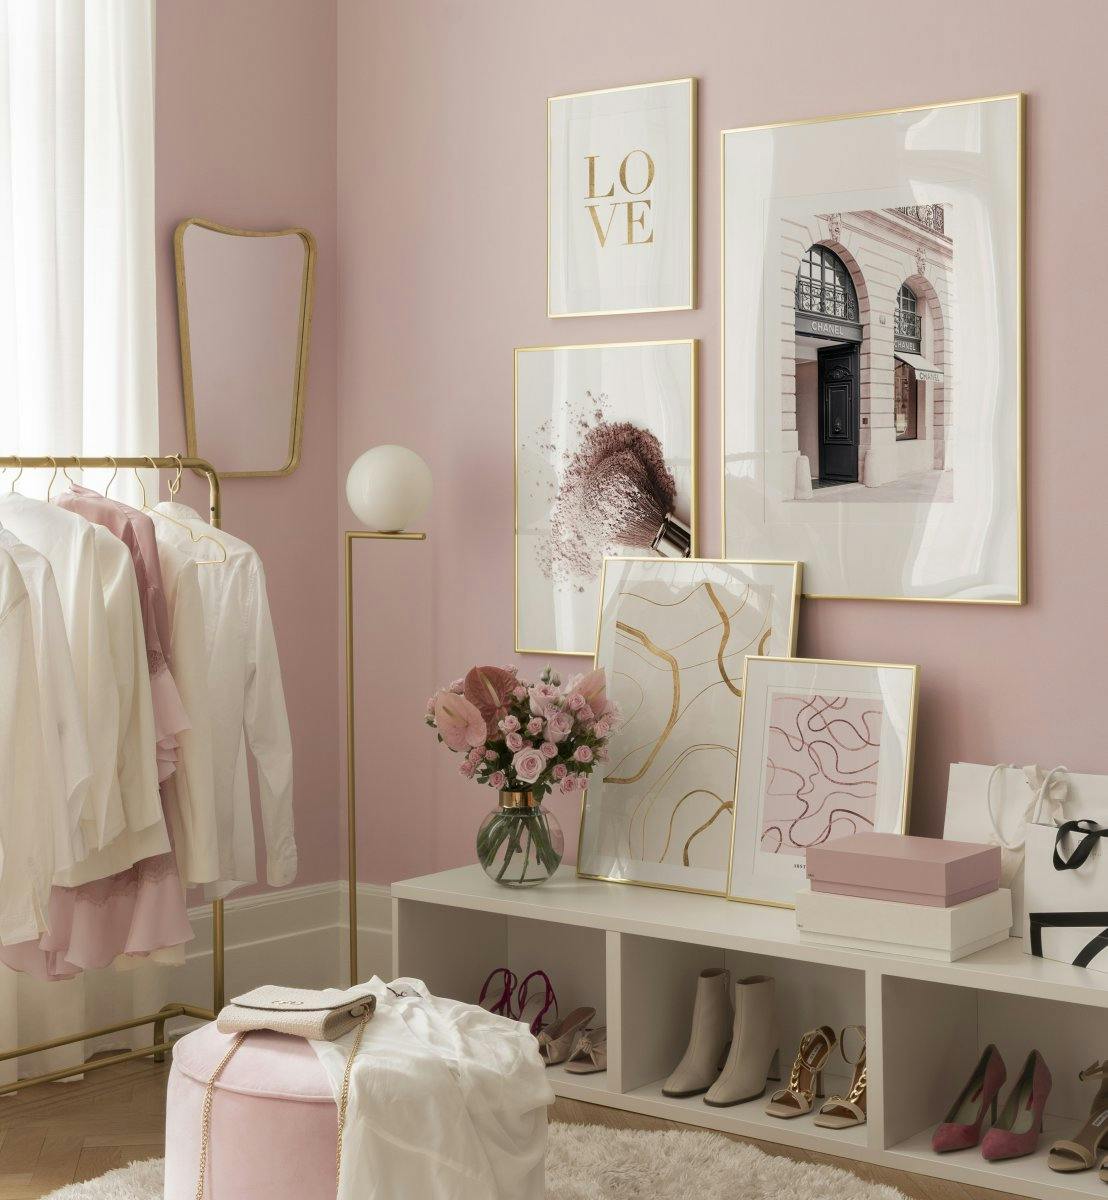 Pink and chic! Art prints for a girl's bedroom